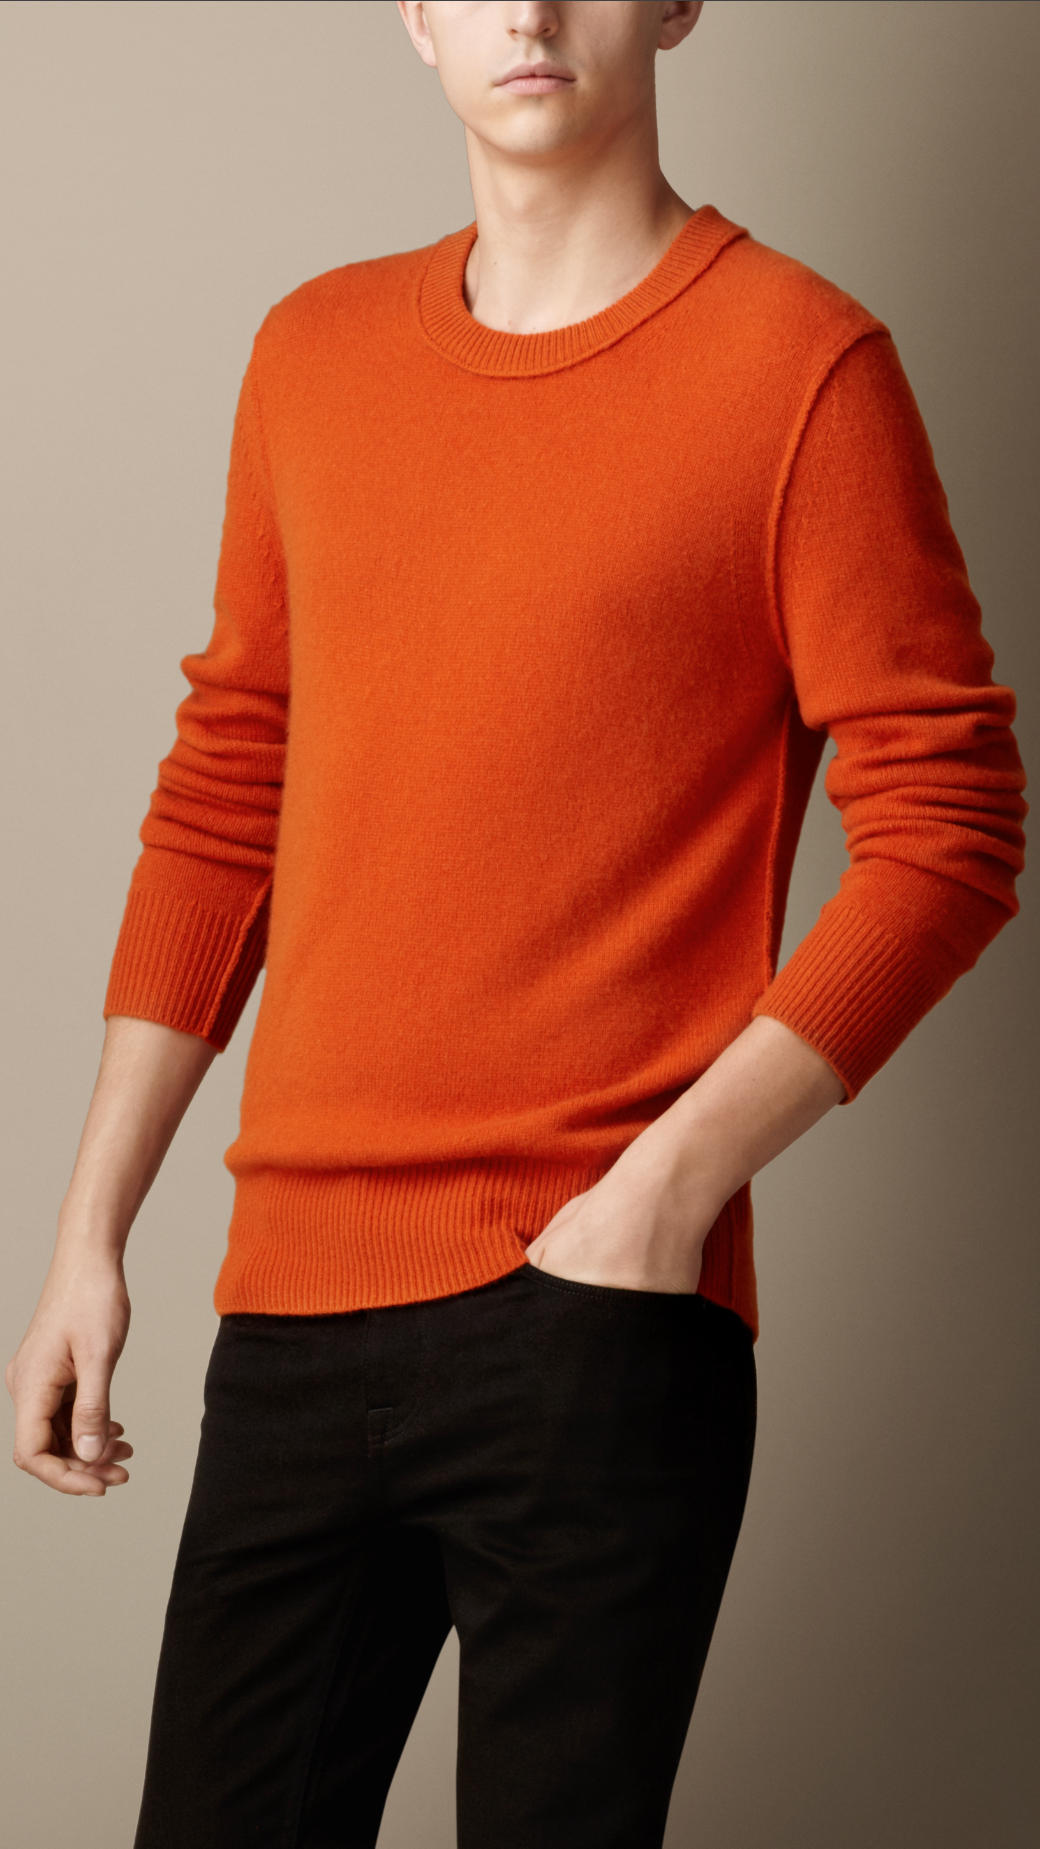 Lyst - Burberry Elbow Patch Cashmere Sweater in Orange for Men